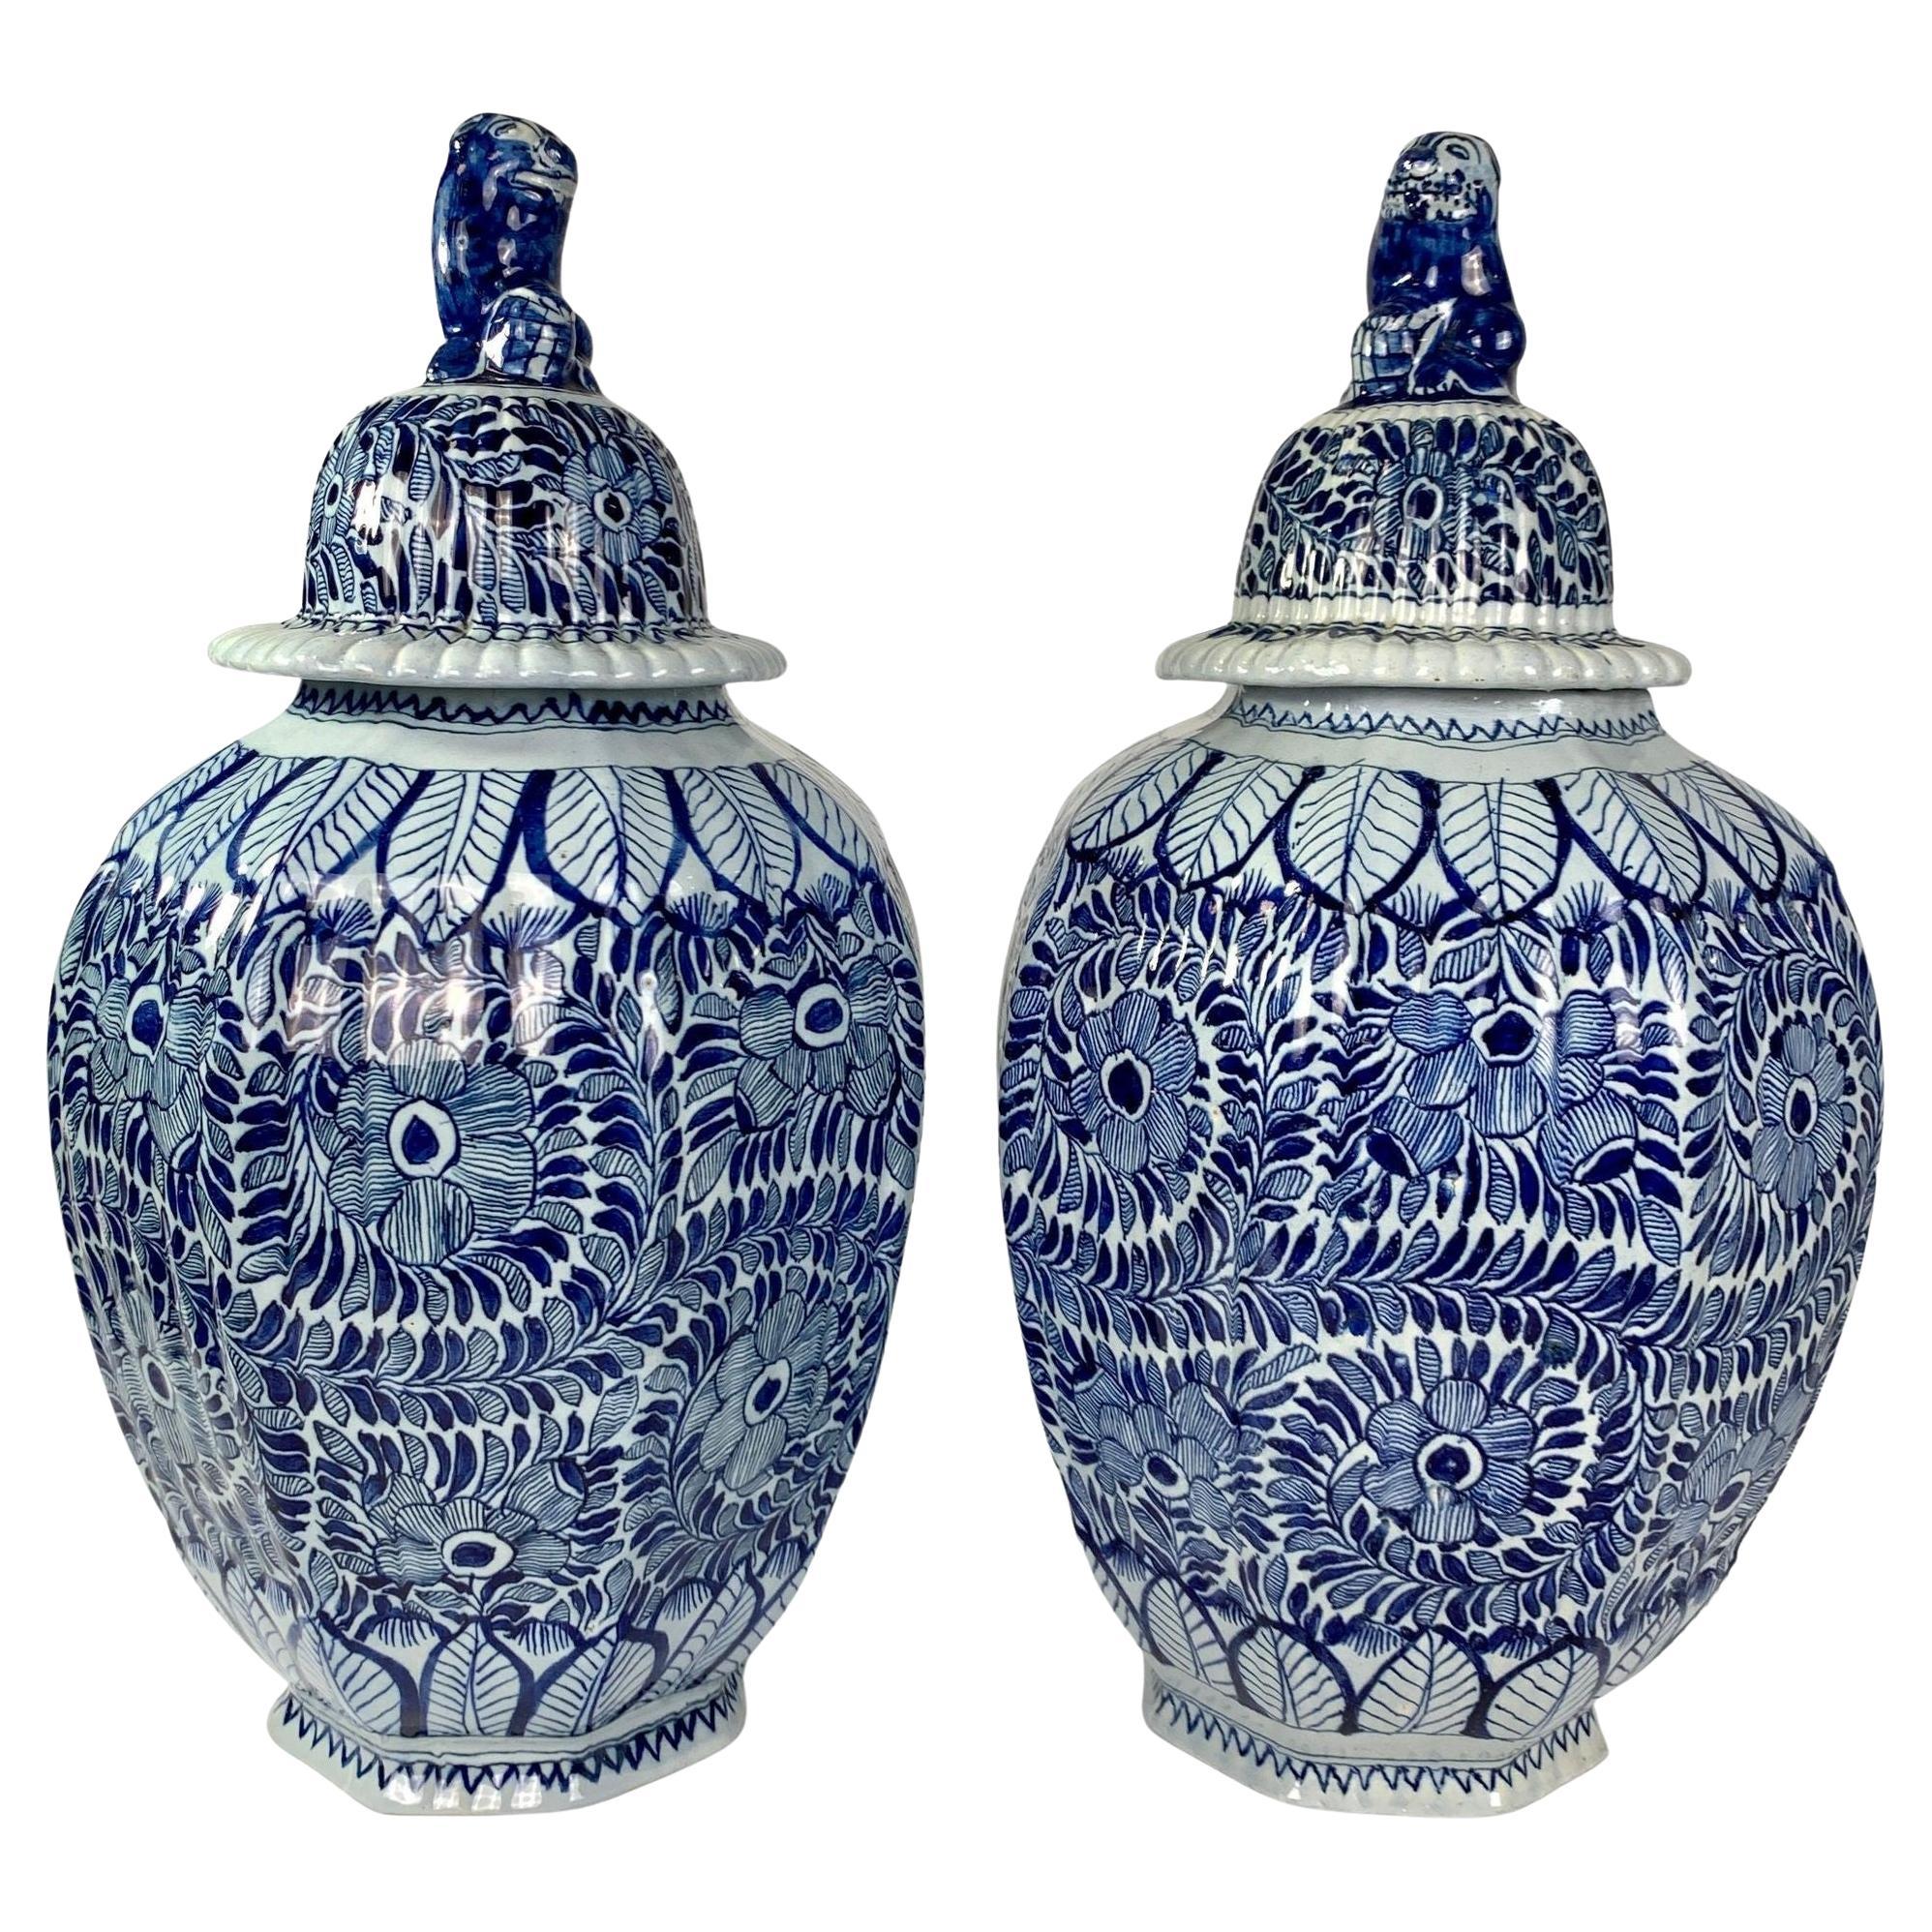 Pair Large Blue and White Delft Jars Made Netherlands 18th Century, Circa 1780